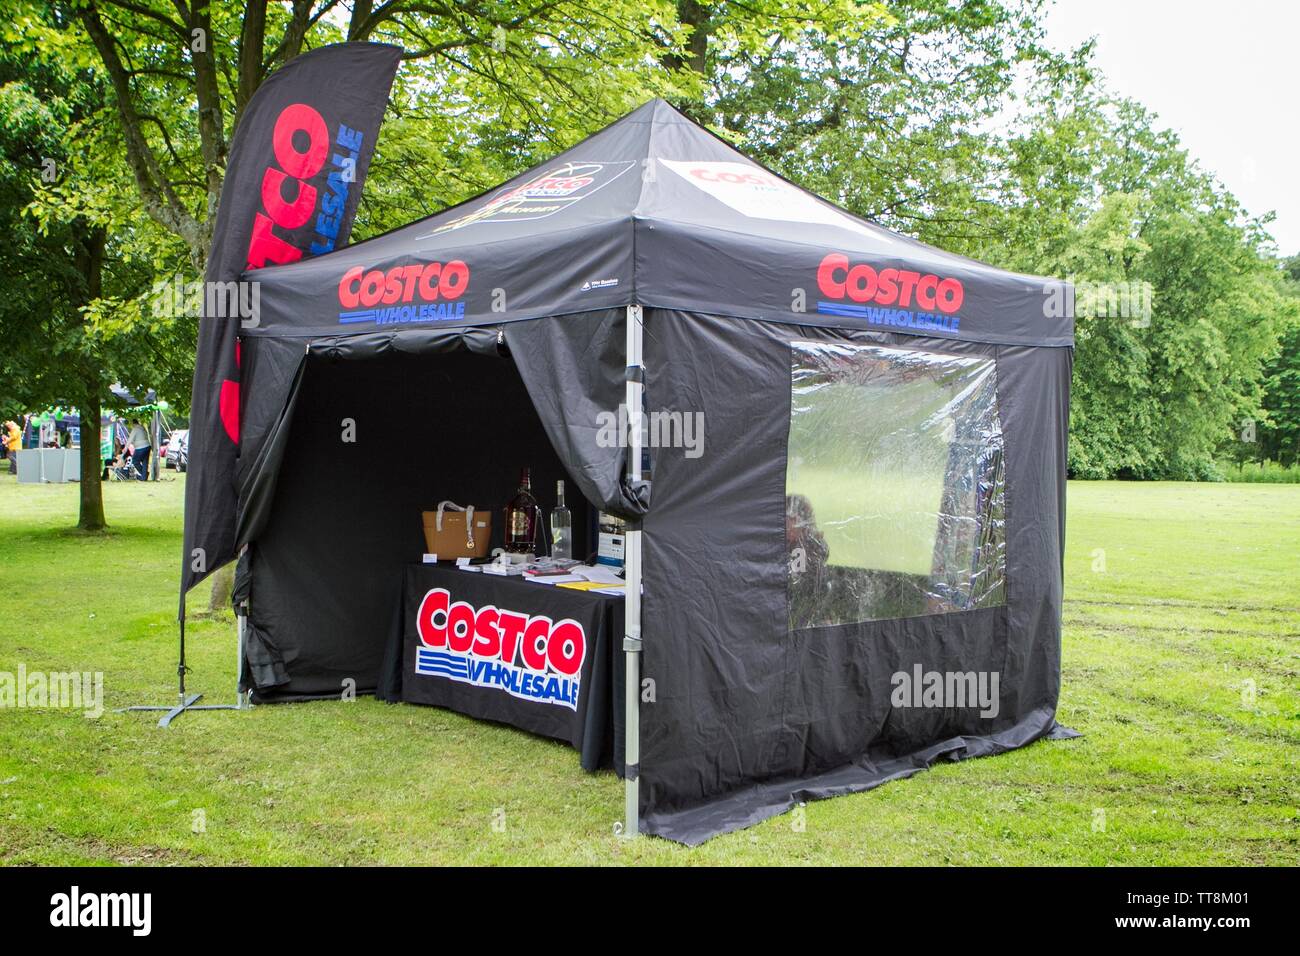 A Costco wholesale promotional stand at the Leyland Park Festival in Leyland, Lancashire, UK Stock Photo